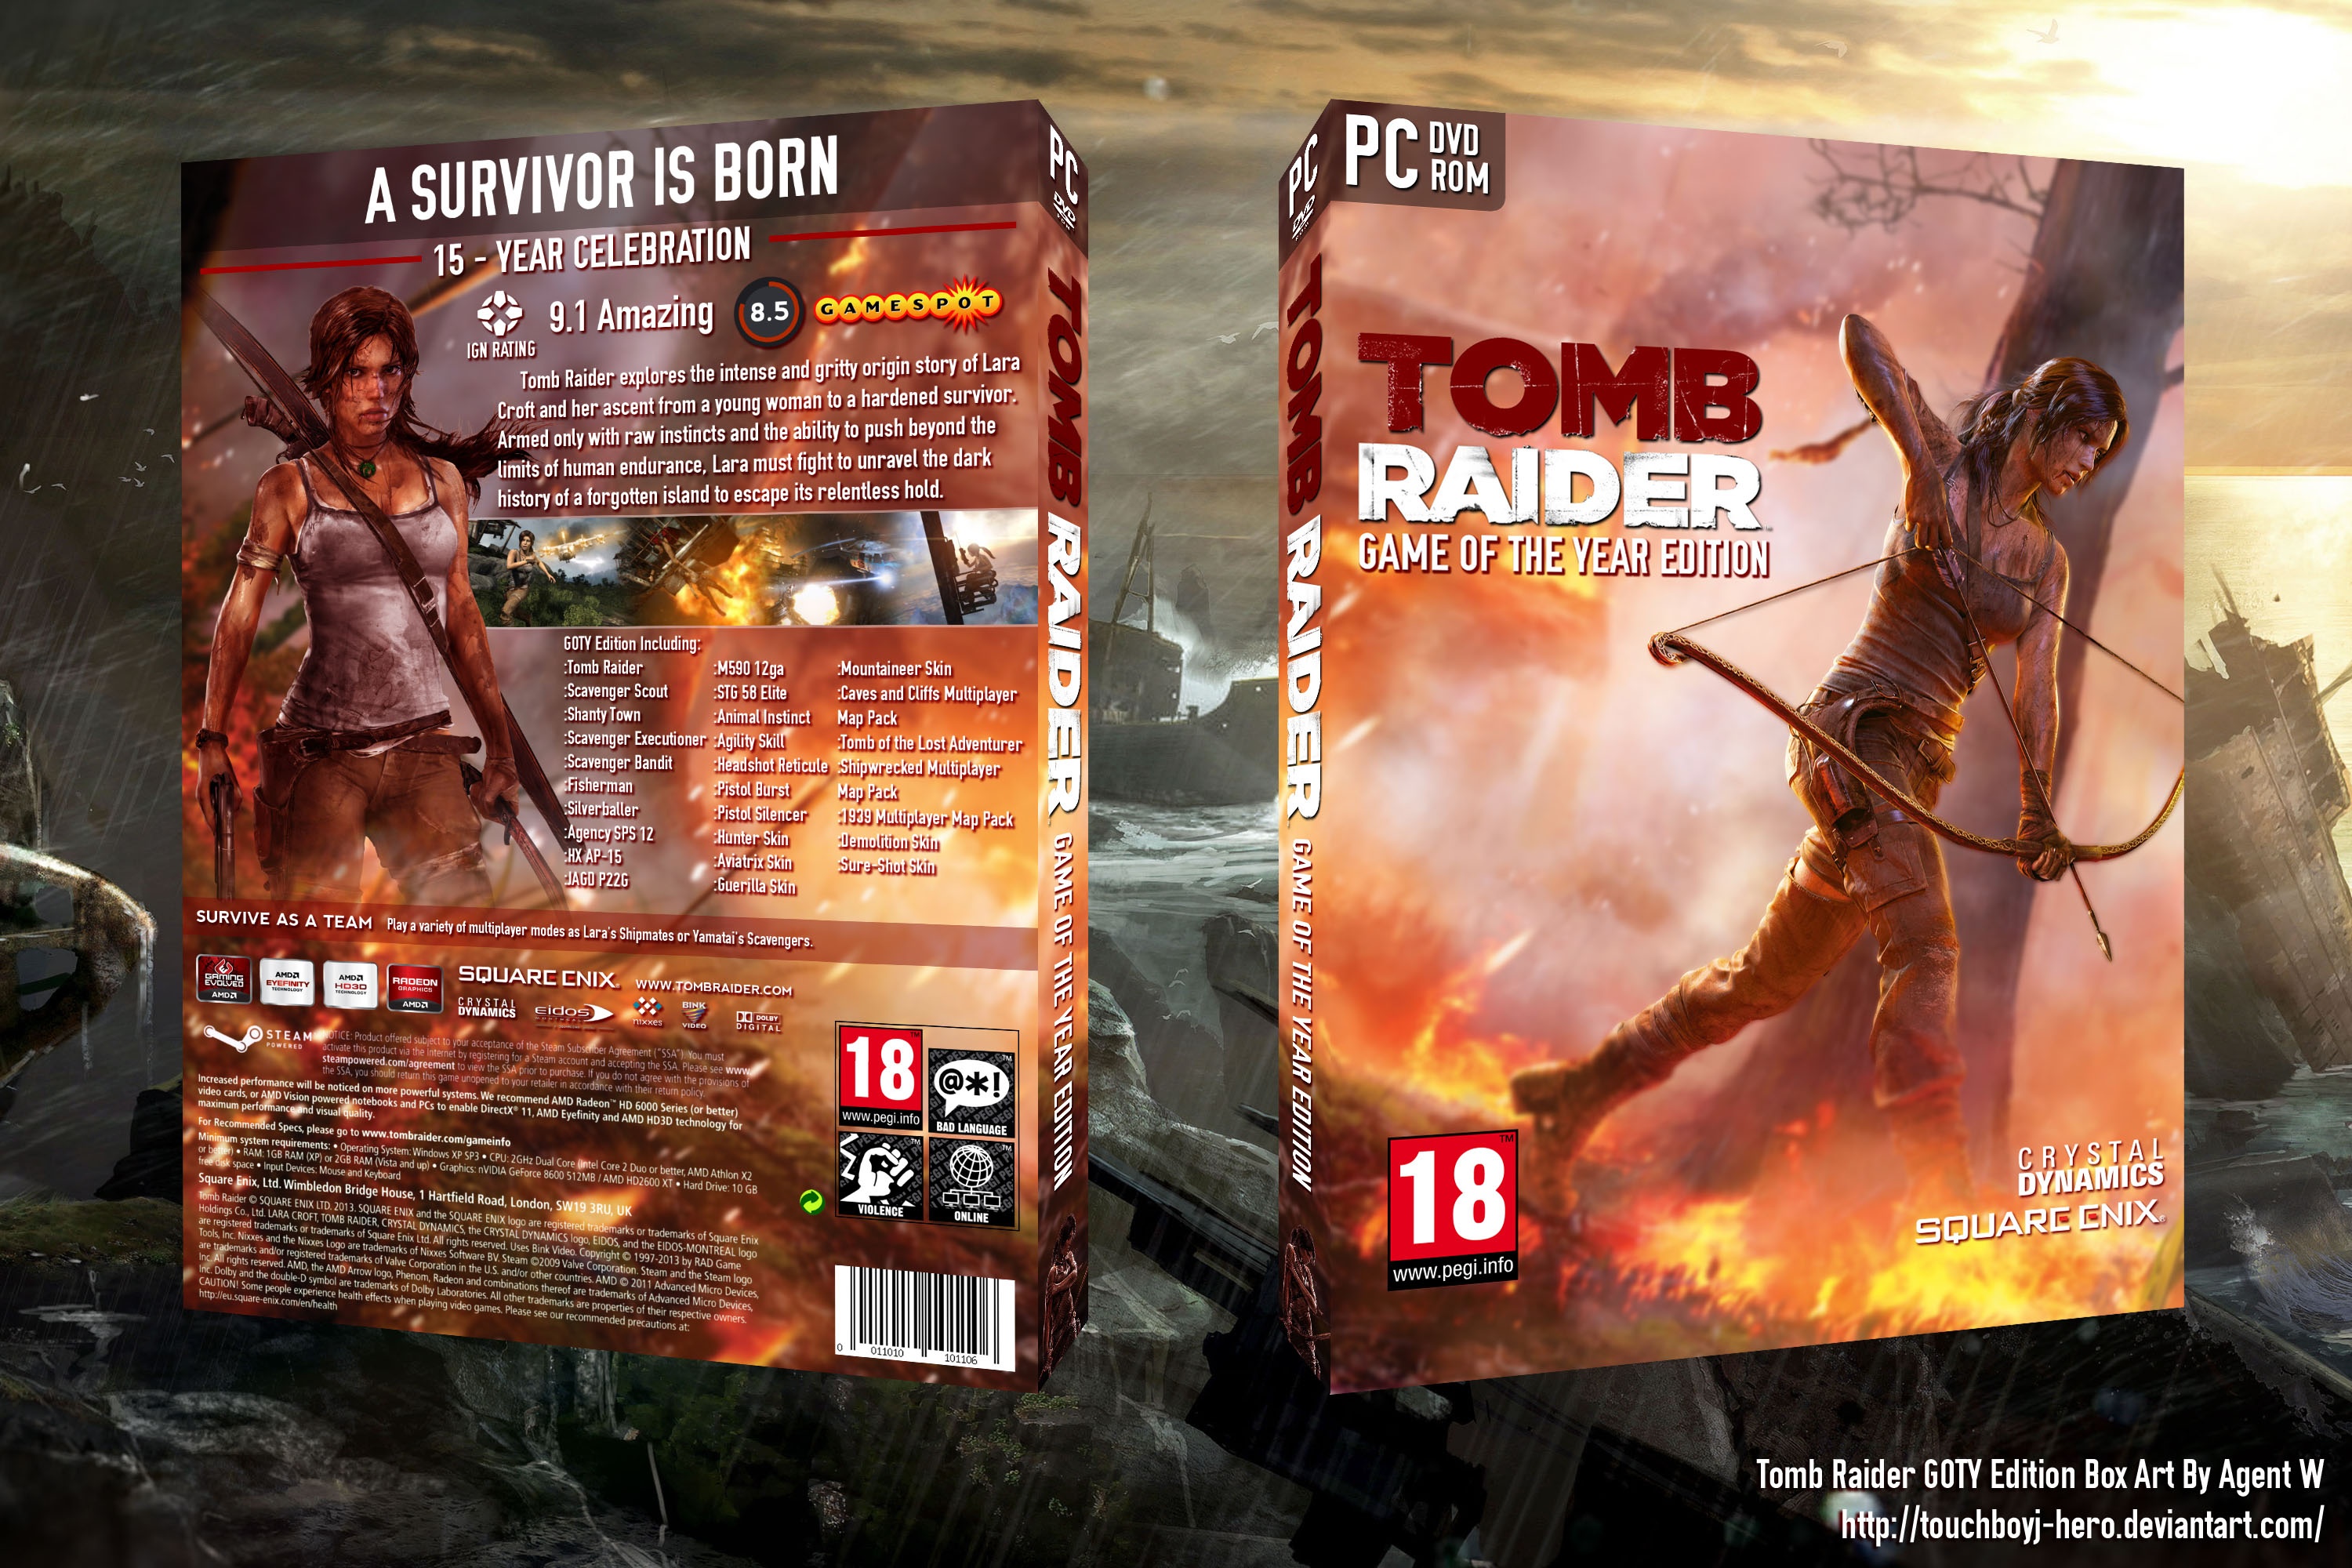 Tomb Raider Game of the Year Edition box cover